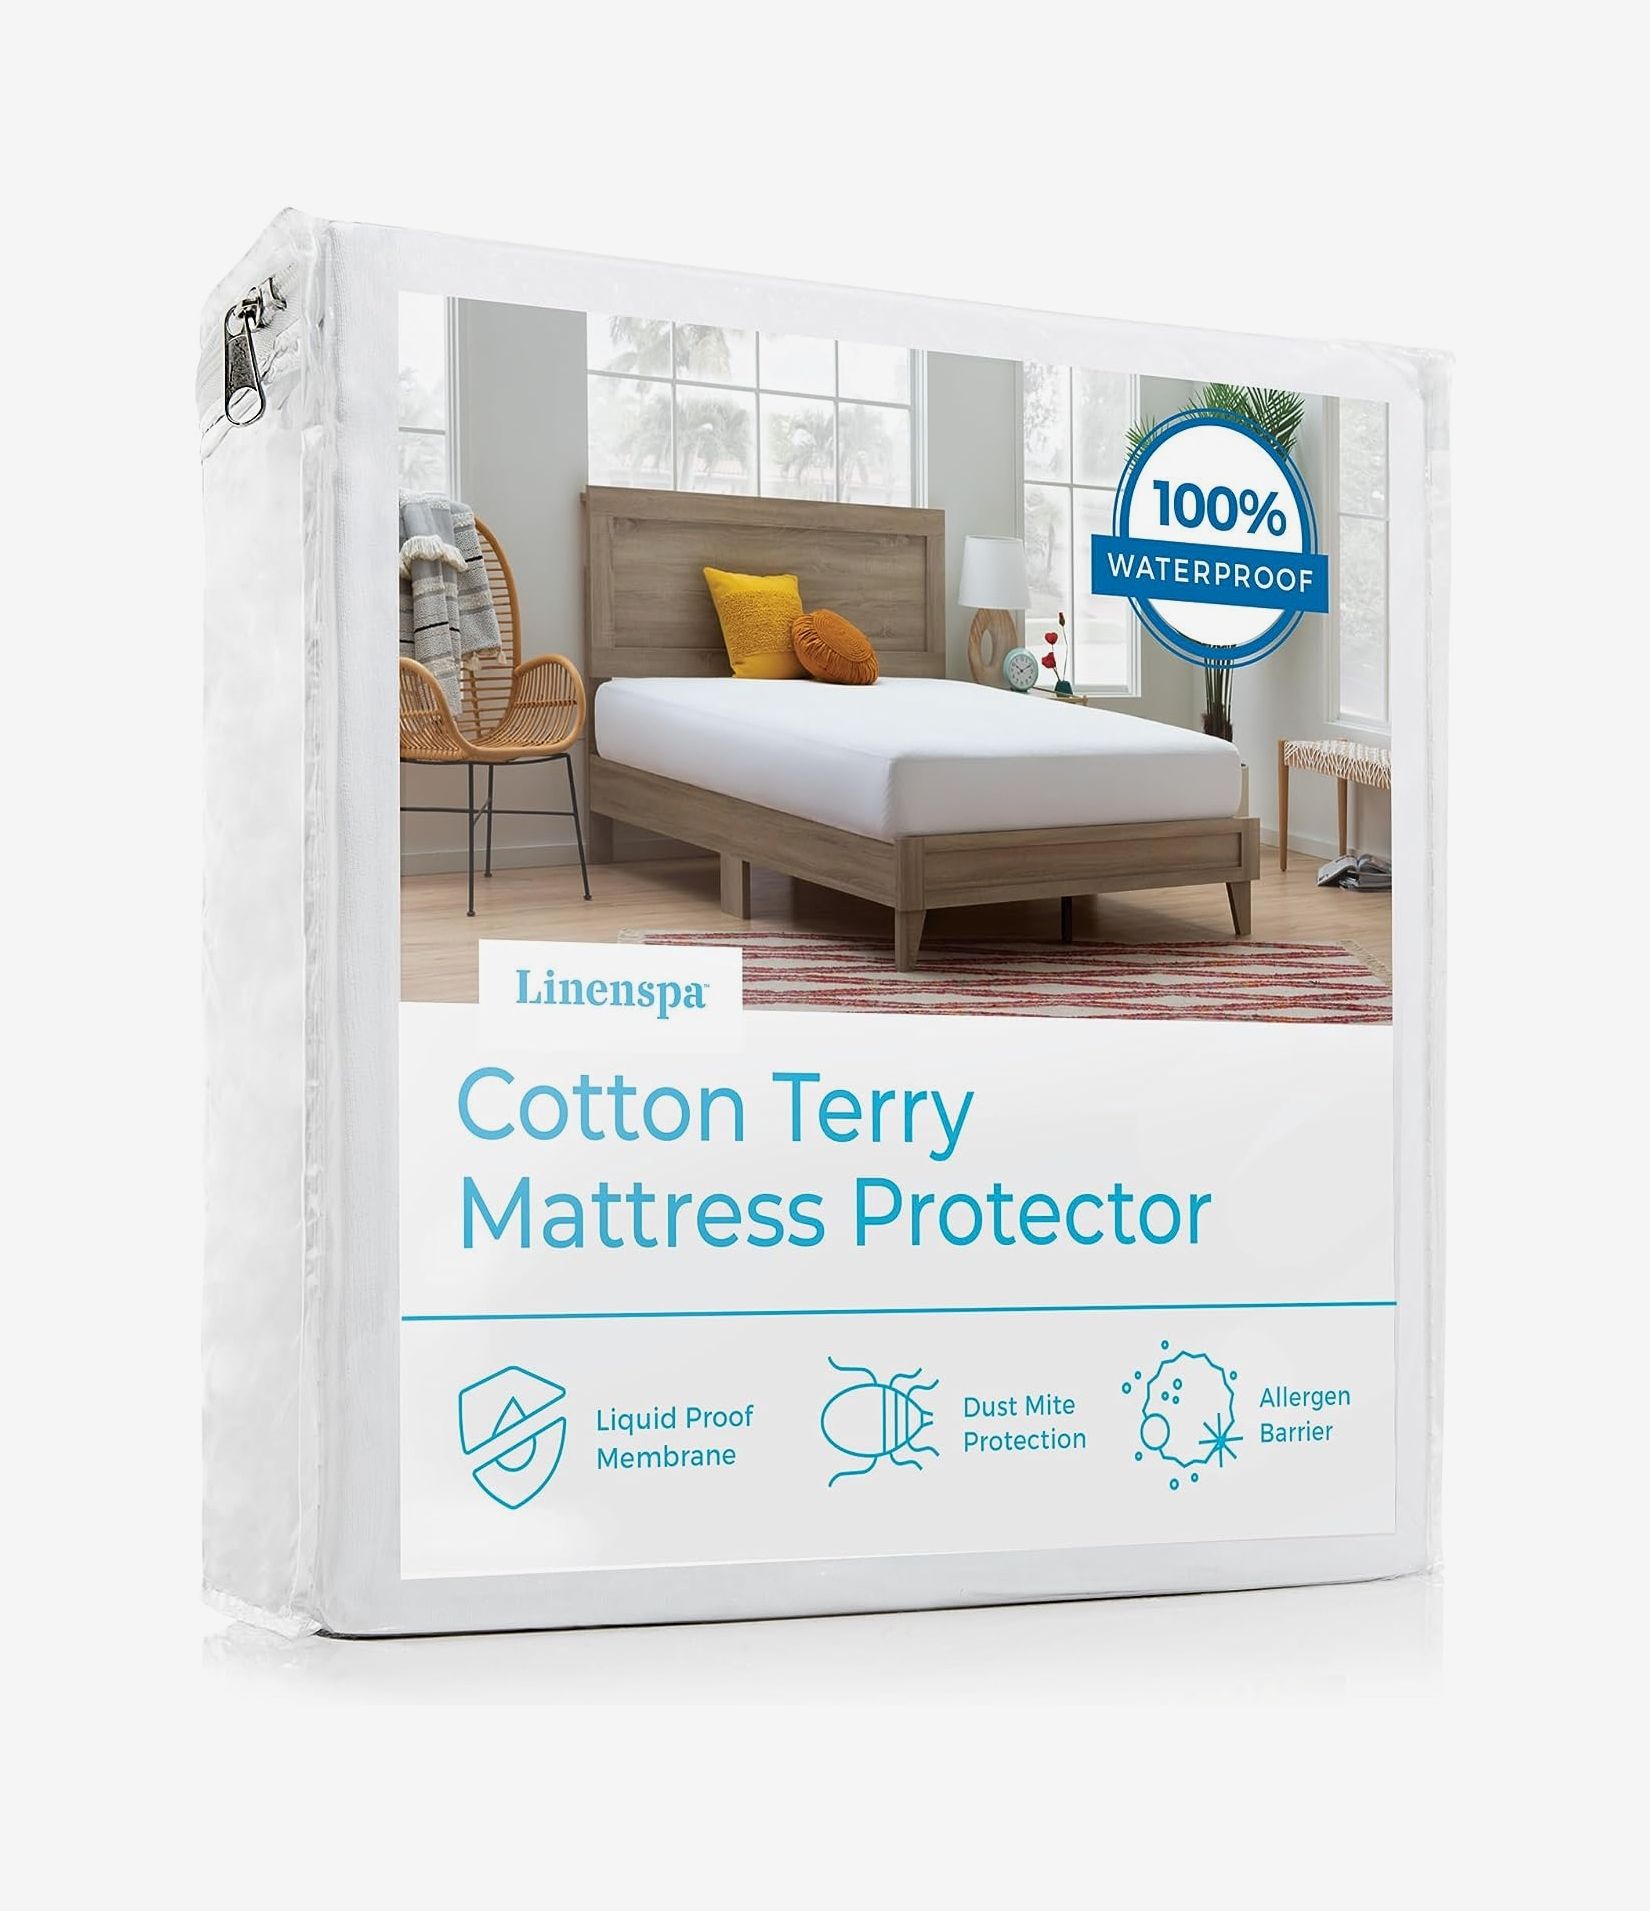 Utopia Bedding Zippered Mattress Encasement - Bed Bug Proof, Dust Mite –  Pest Control Everything